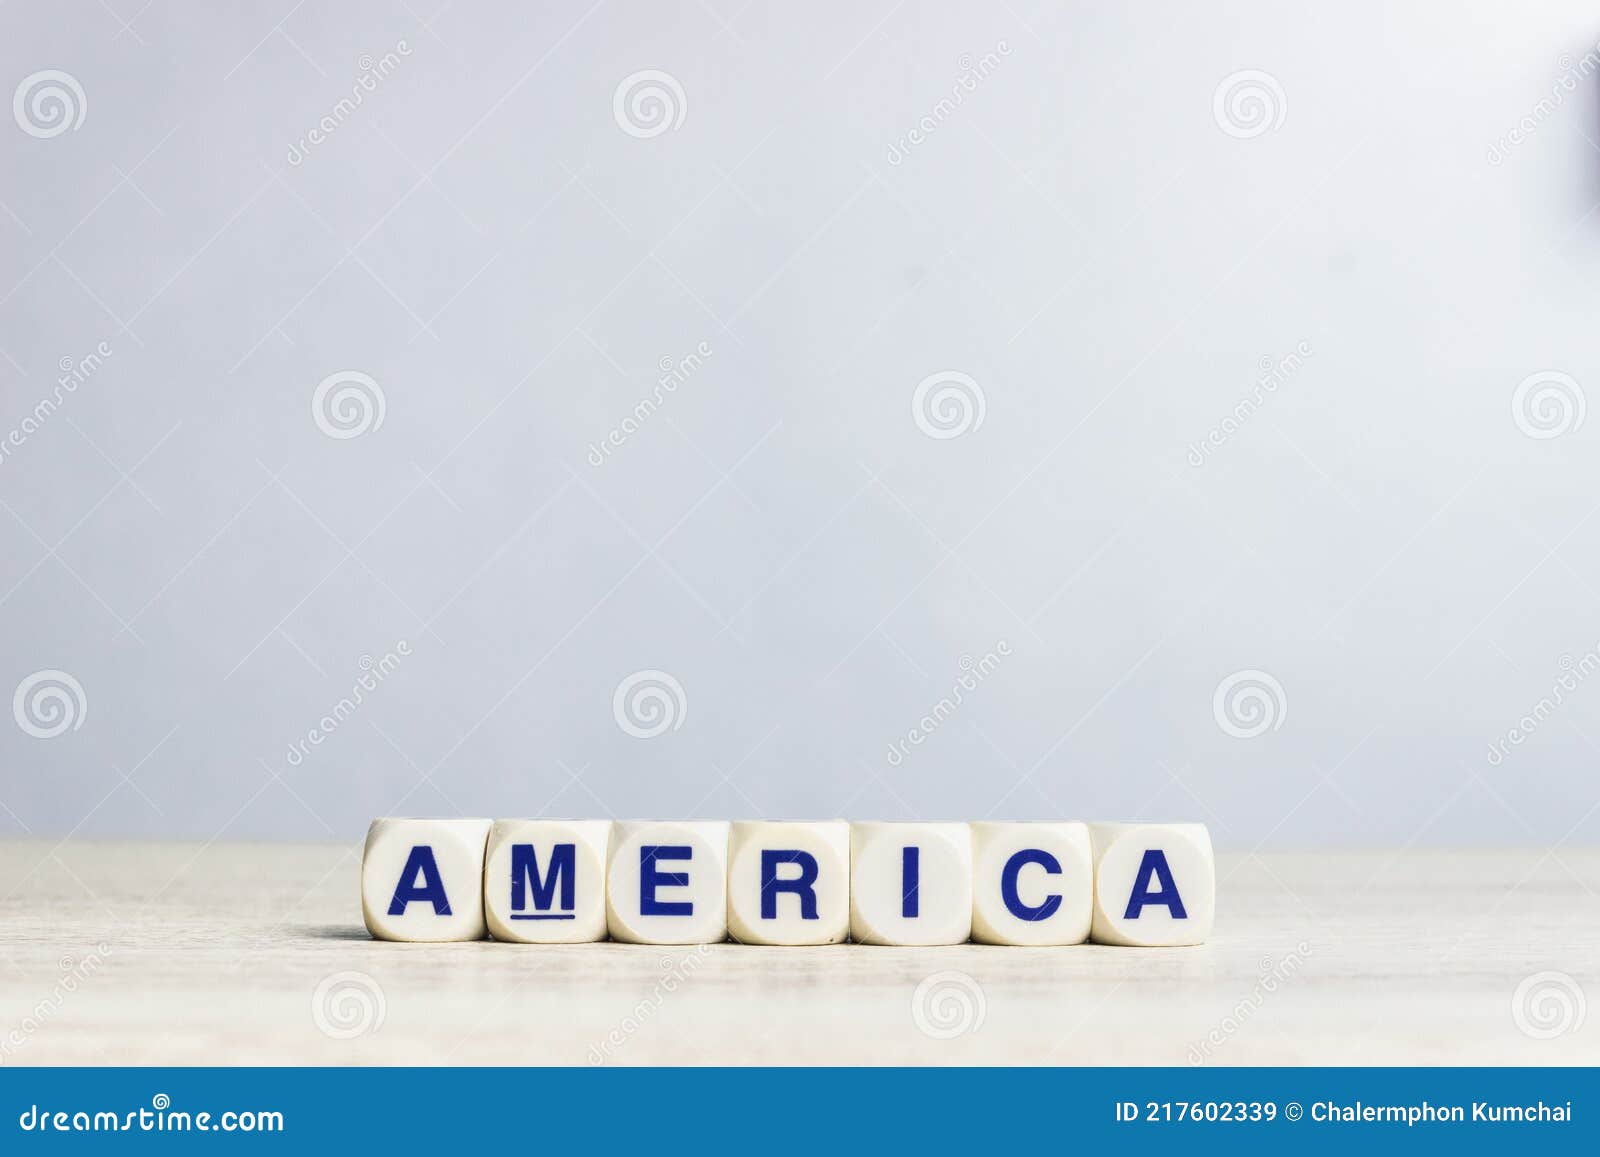 america - word from wooden blocks with letters